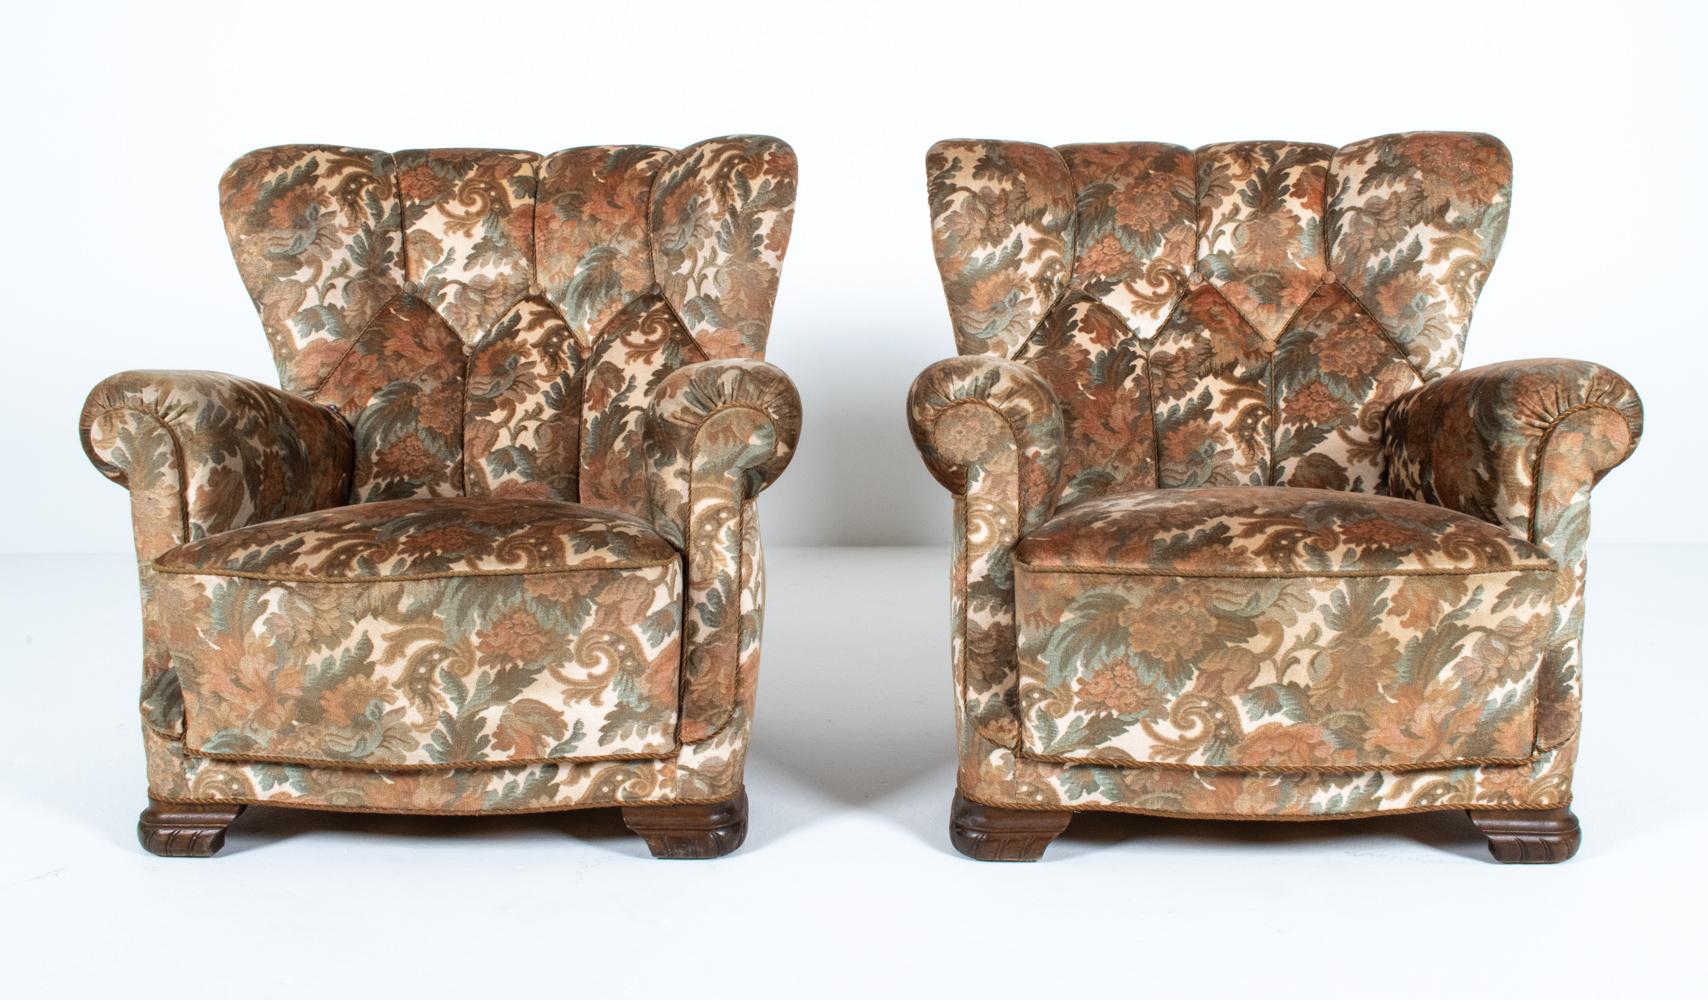 Pair of Danish Channel-Back Club Chairs, c. 1940's For Sale 6